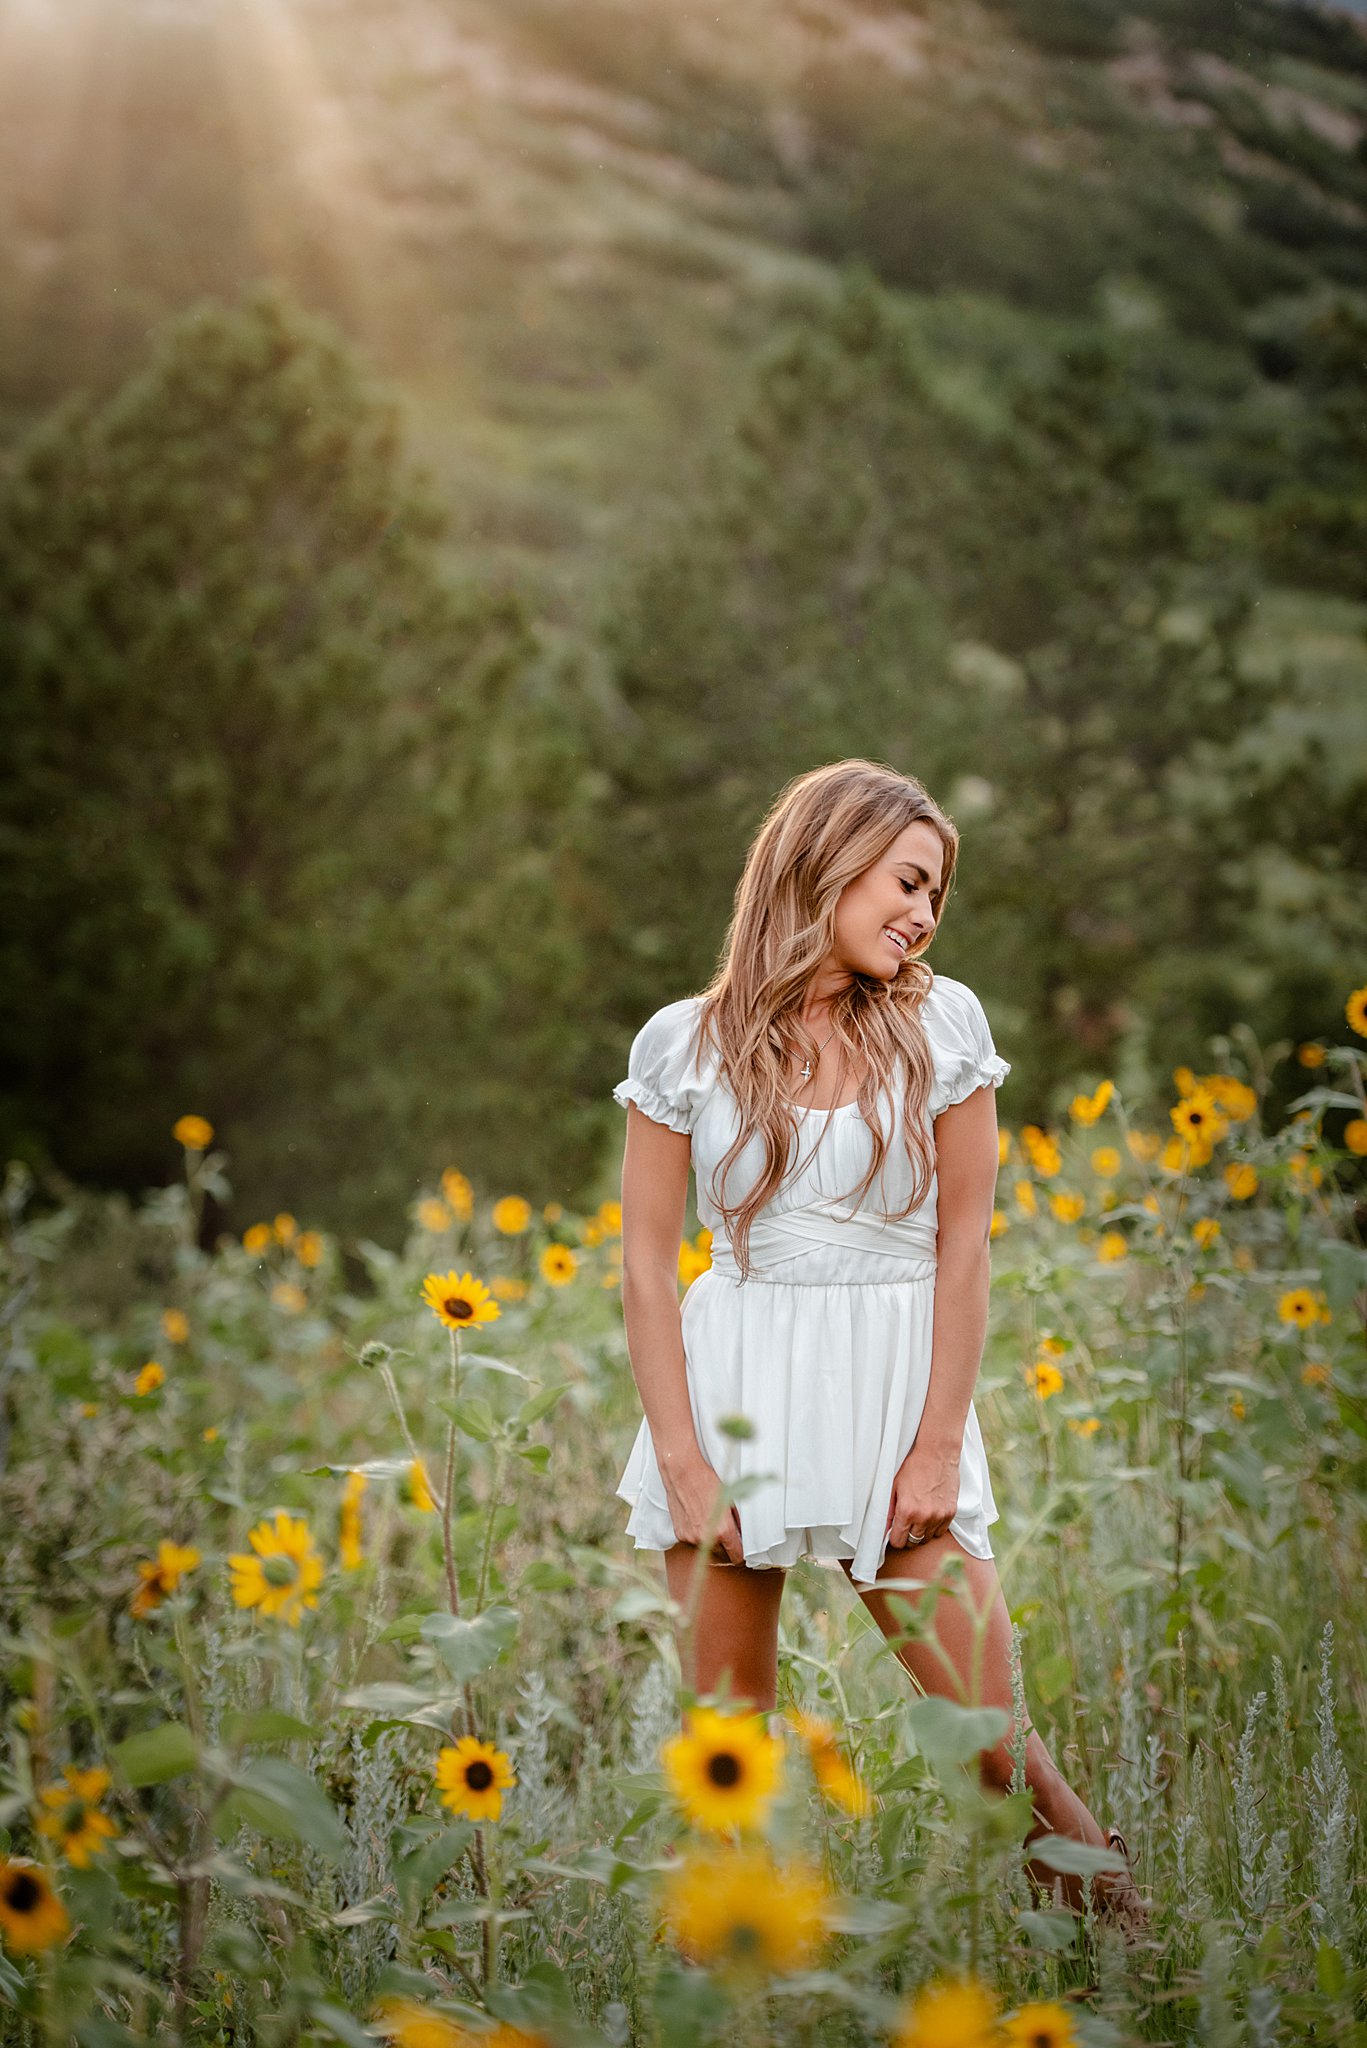 A high school senior in a white dress stands in a field of wildflowers at sunset